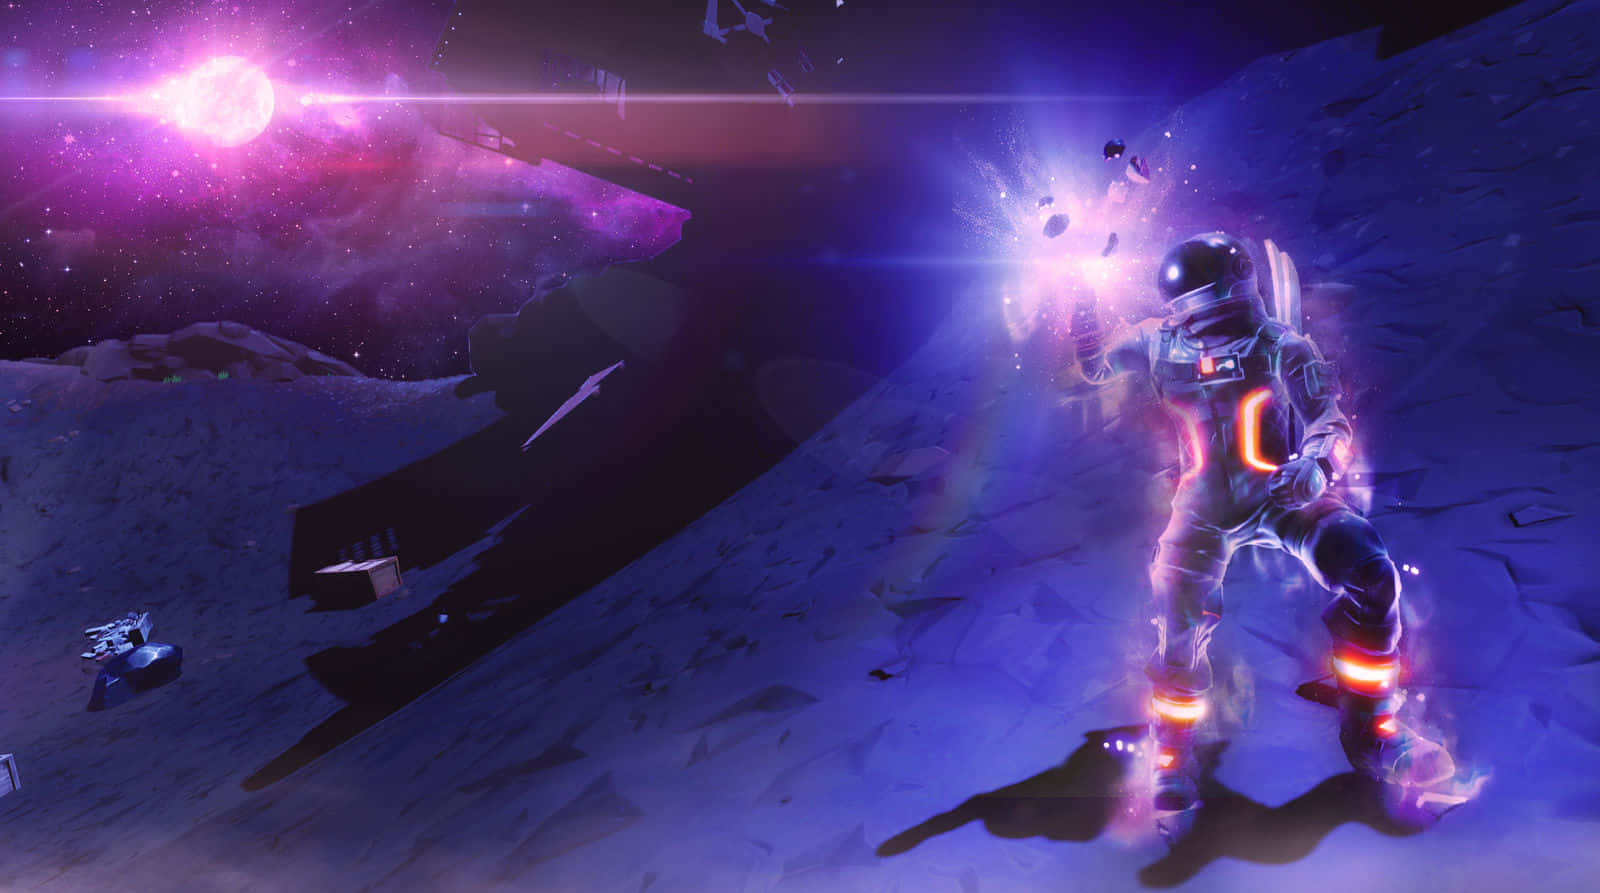 Unlock the vista you’ve only dreamed of in Fortnite Galaxy Wallpaper